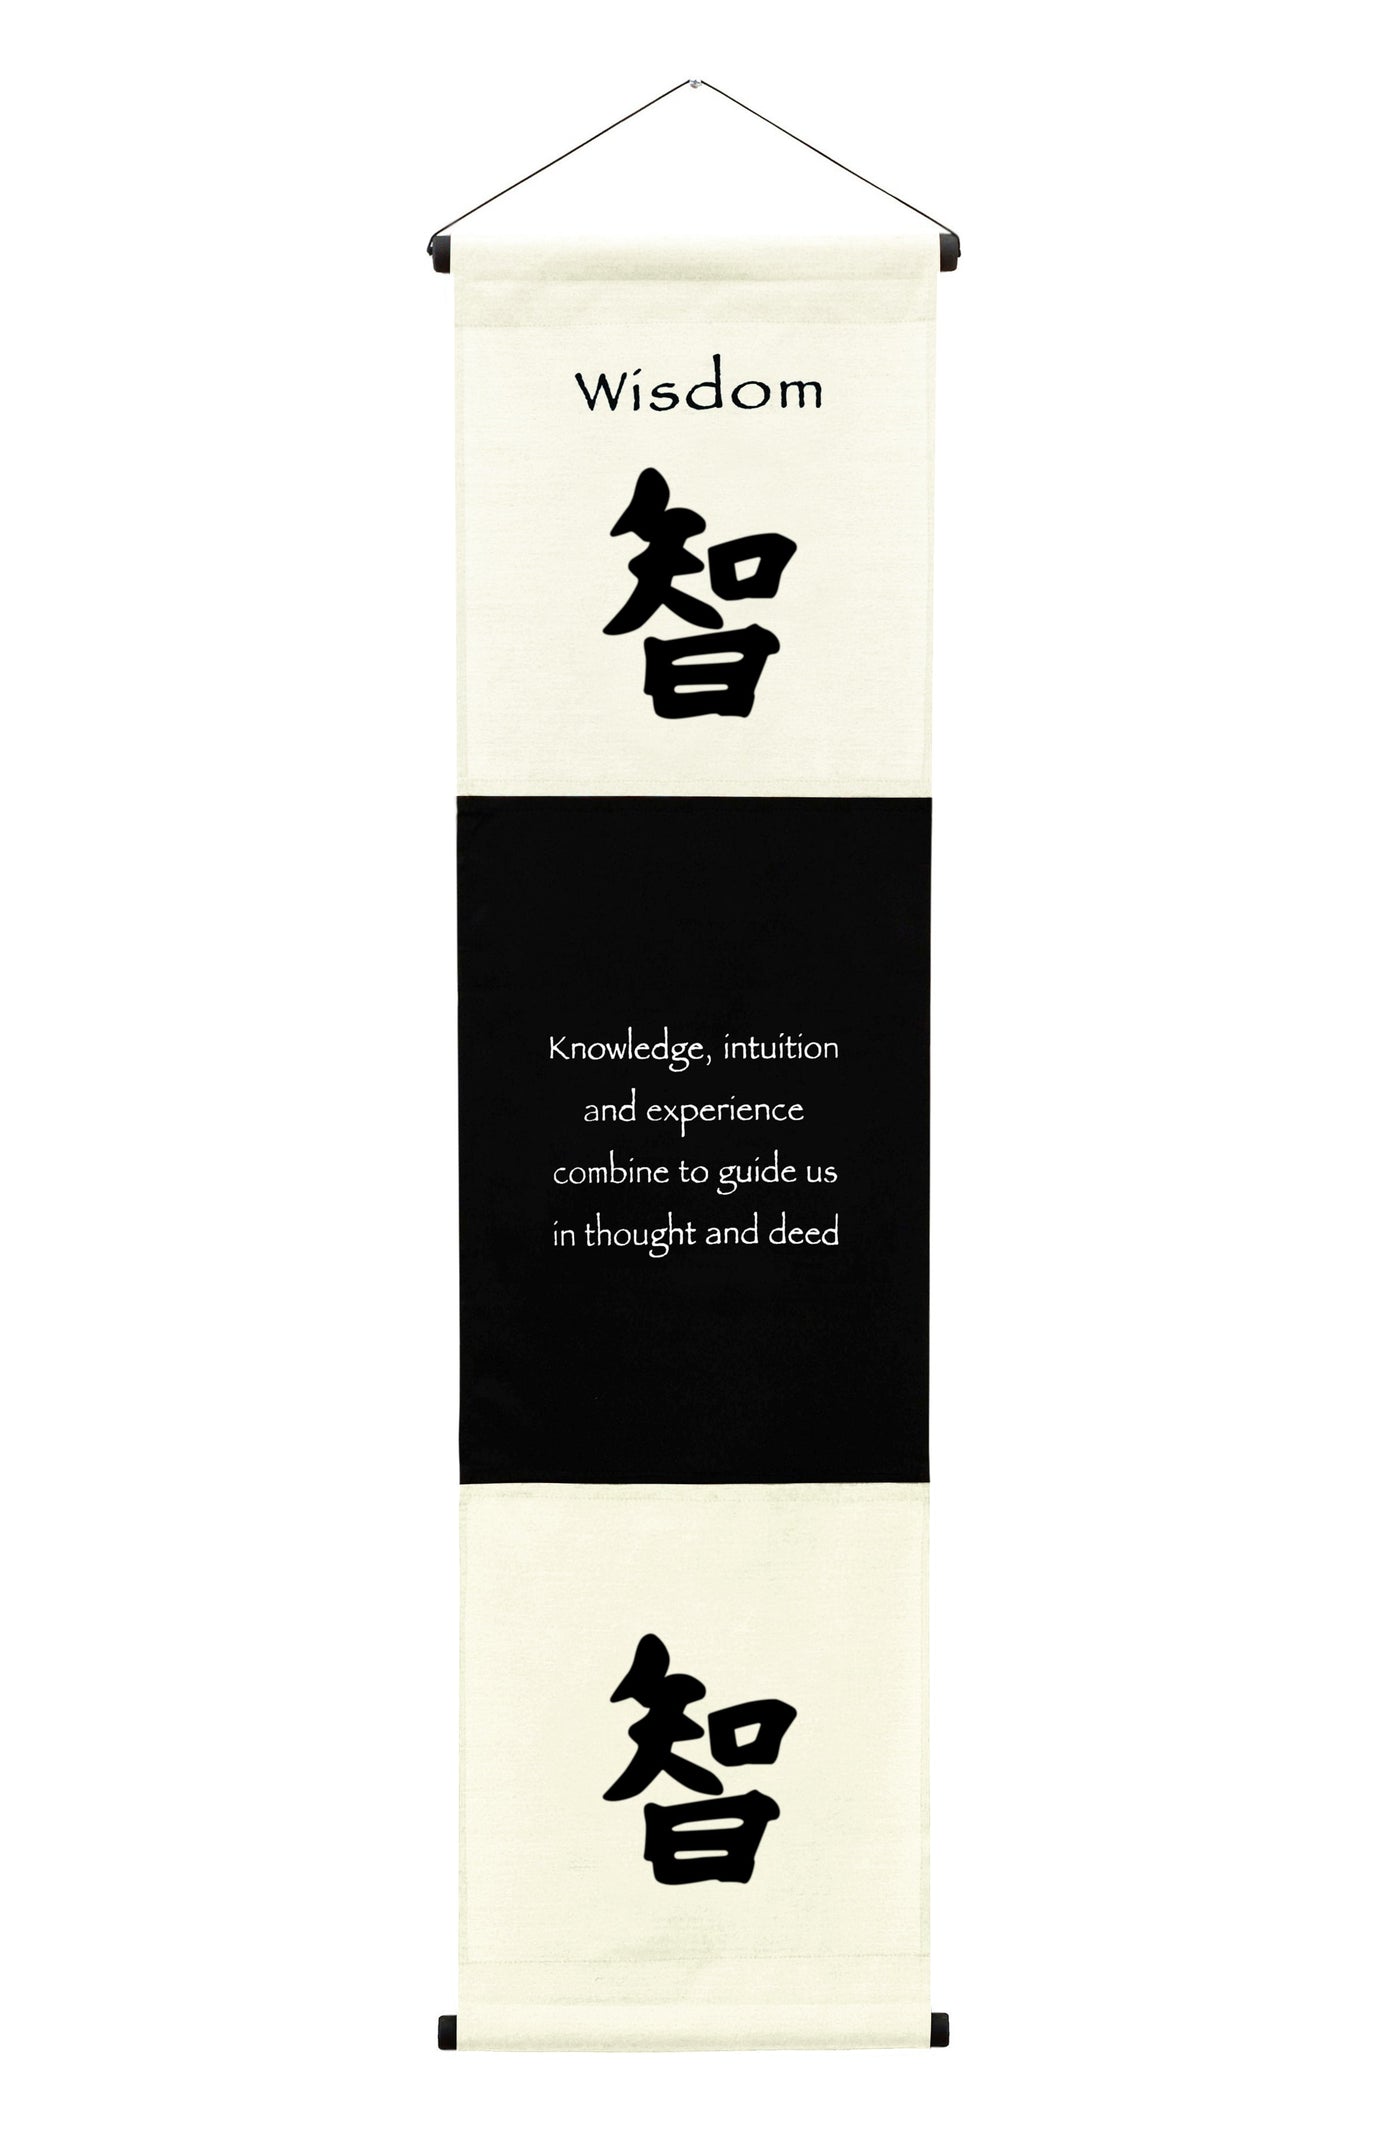 Inspirational Wall Decor "Wisdom" Banner Large, Inspiring Quote Wall Hanging Scroll, Affirmation Motivational Uplifting Art, Thought Saying Tapestry